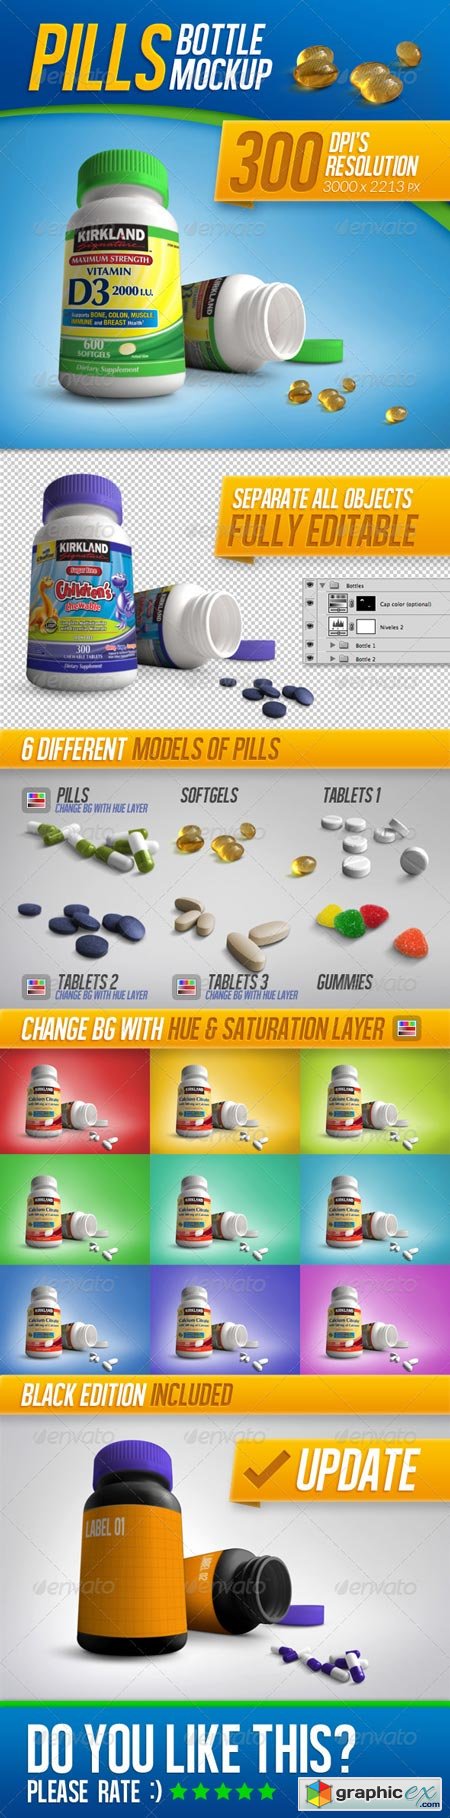 Download Tablets, Vitamins and Pills Bottle Mockup 7003759 » Free Download Vector Stock Image Photoshop Icon